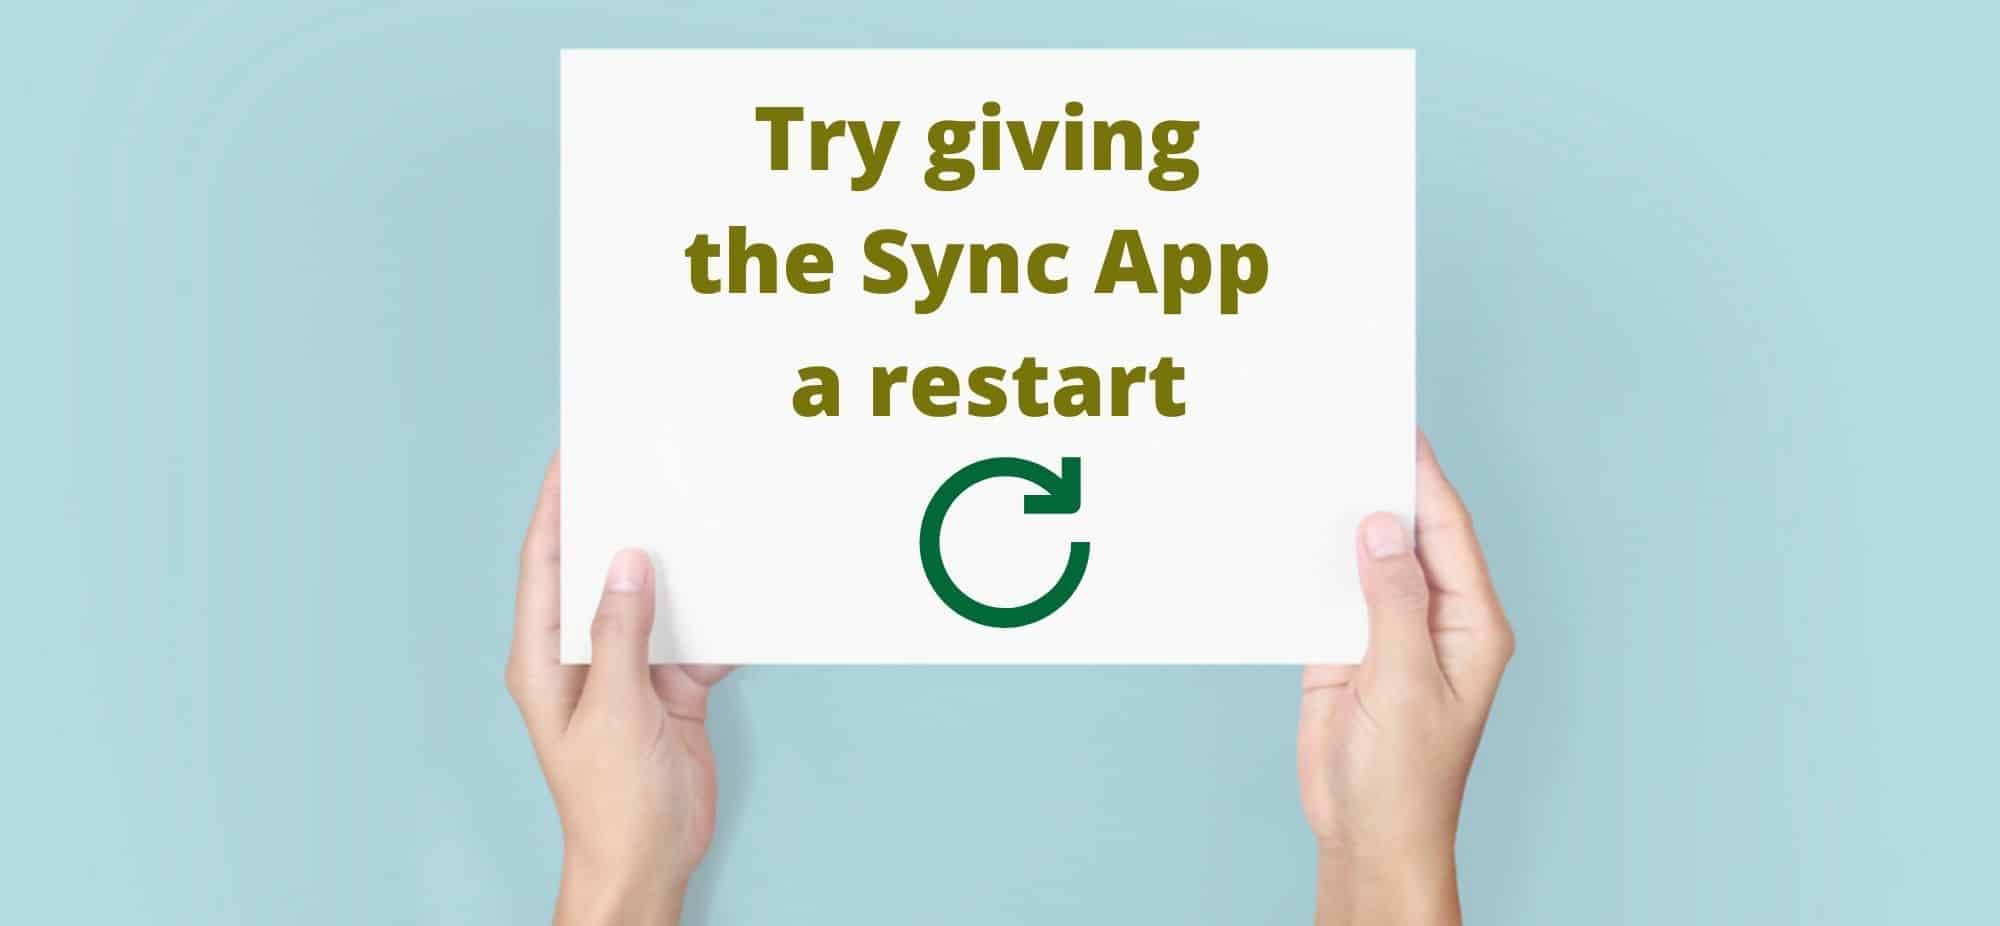 Try giving the Sync App a restart